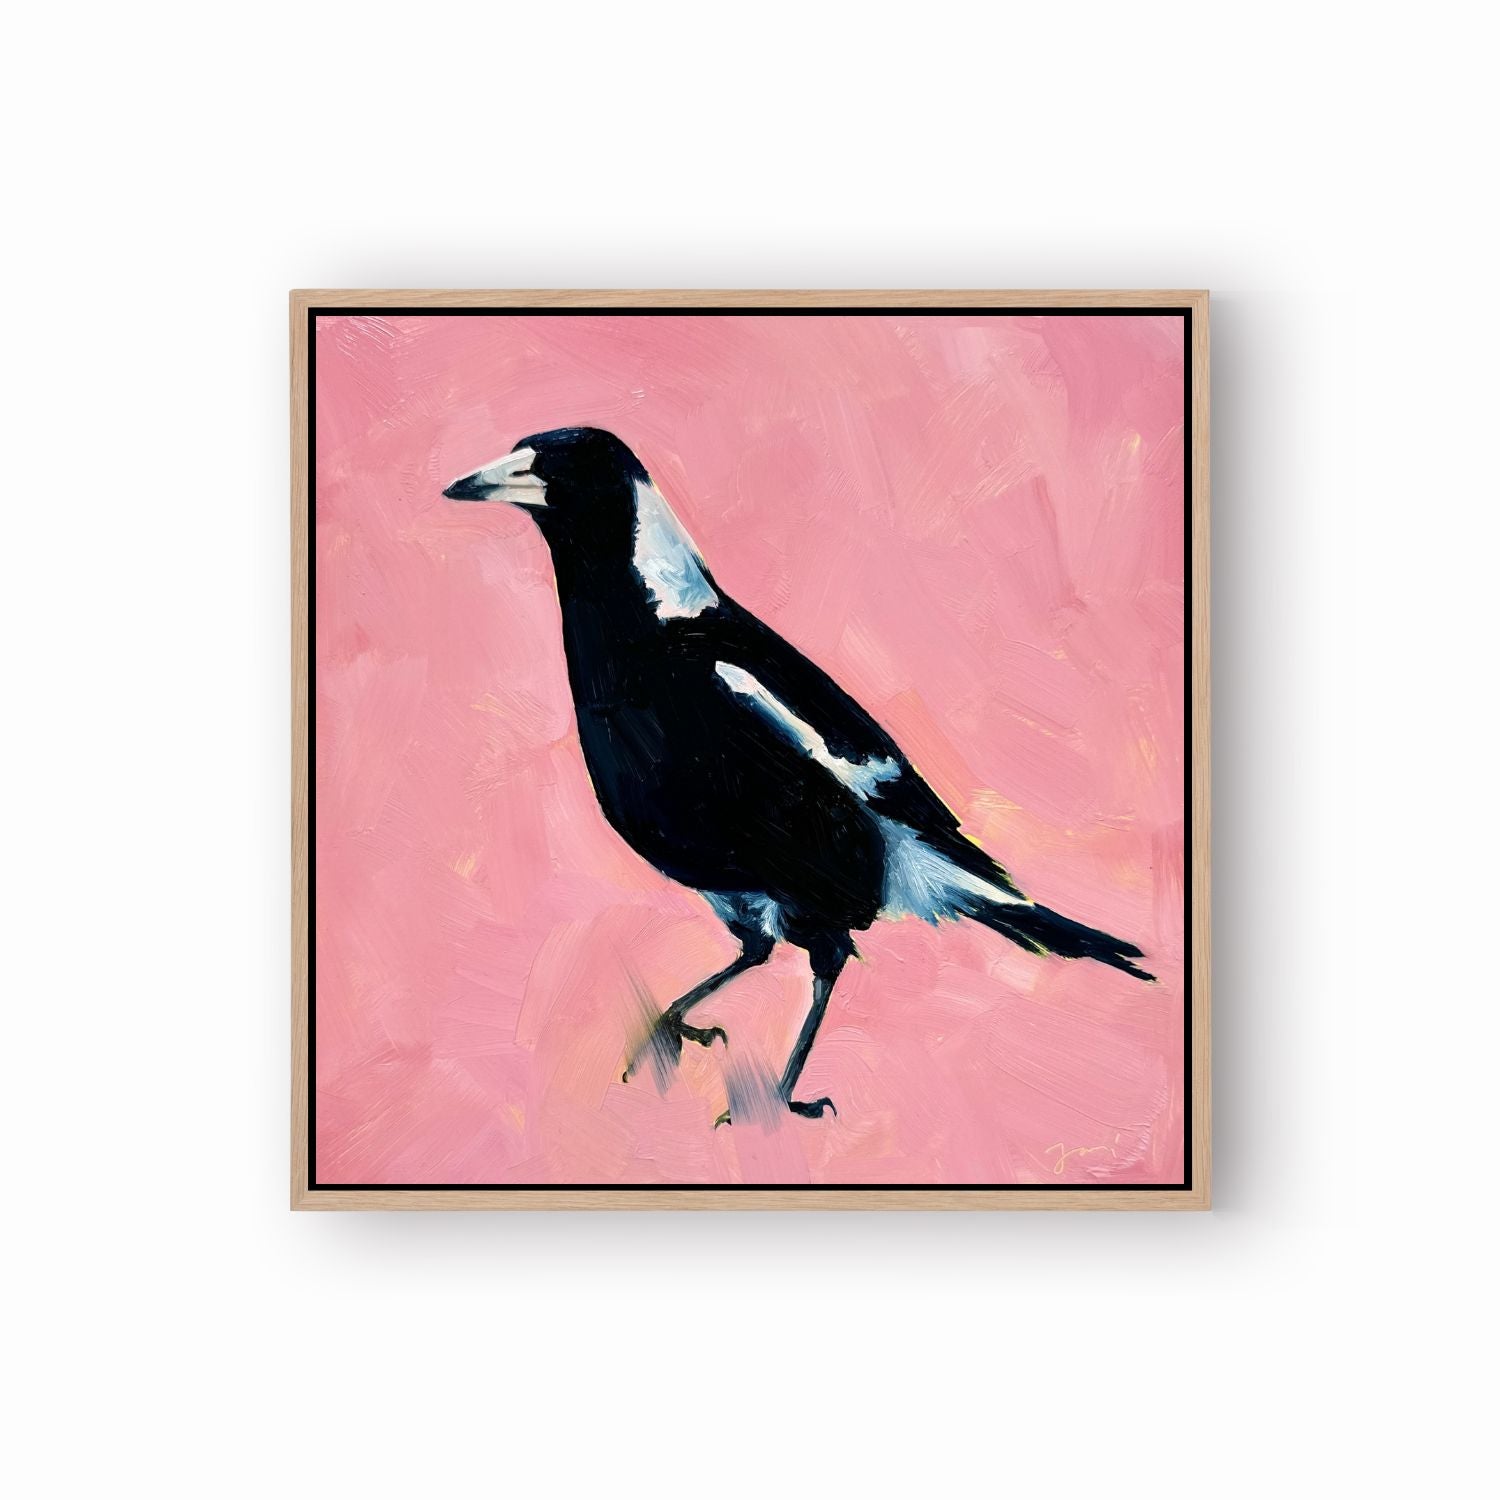 modern and contemporary original oil painting of a colourful navy blue and white magpie on a textured bubble gum pink background